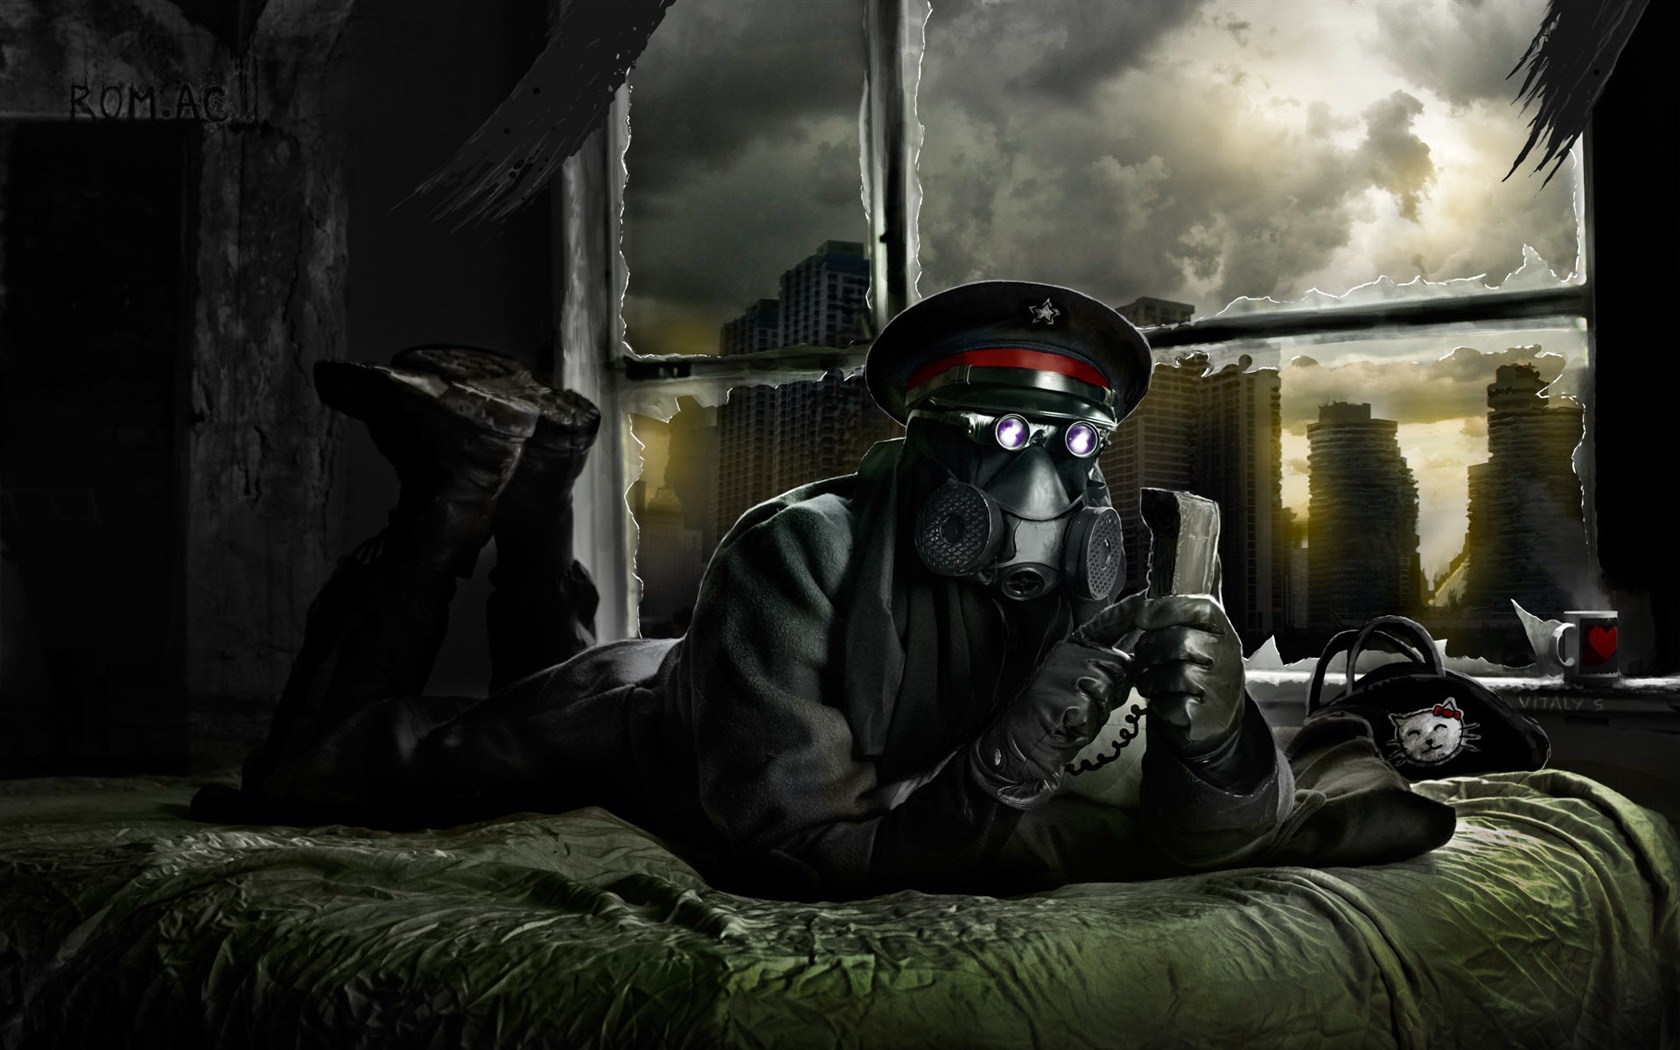 Romantically Apocalyptic creative painting wallpapers (2) #14 - 1680x1050